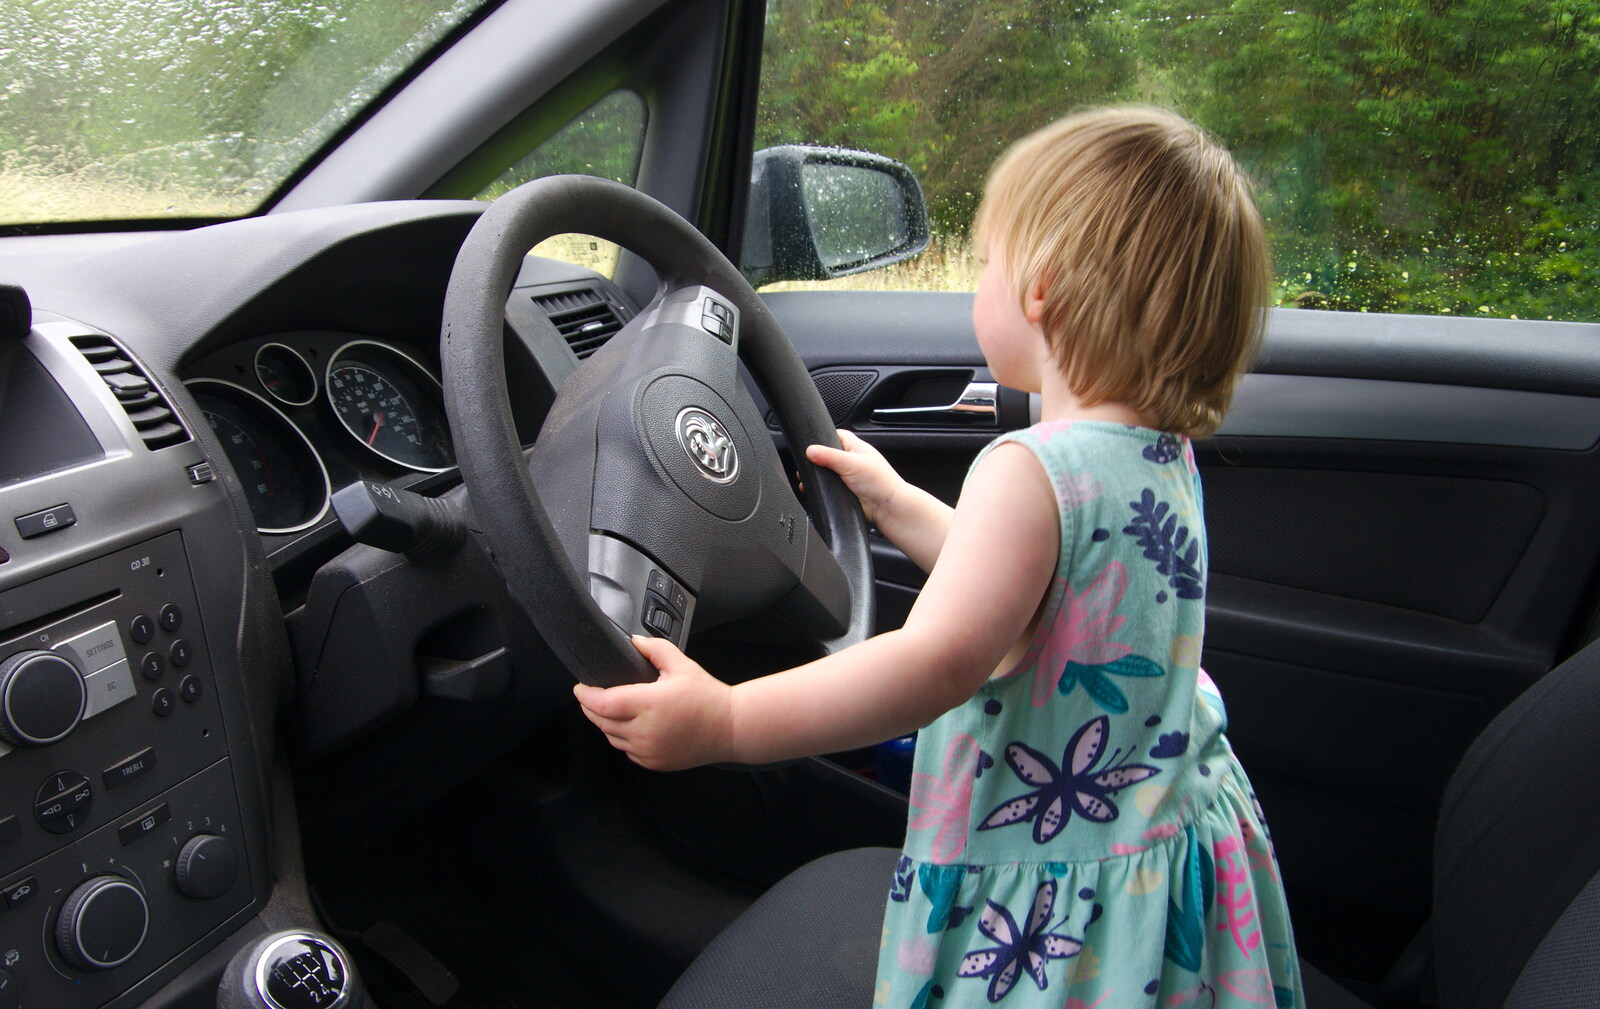 Rachel pretends to drive from Glencar Waterfall and Parke's Castle, Kilmore, Leitrim, Ireland - 18th August 2019